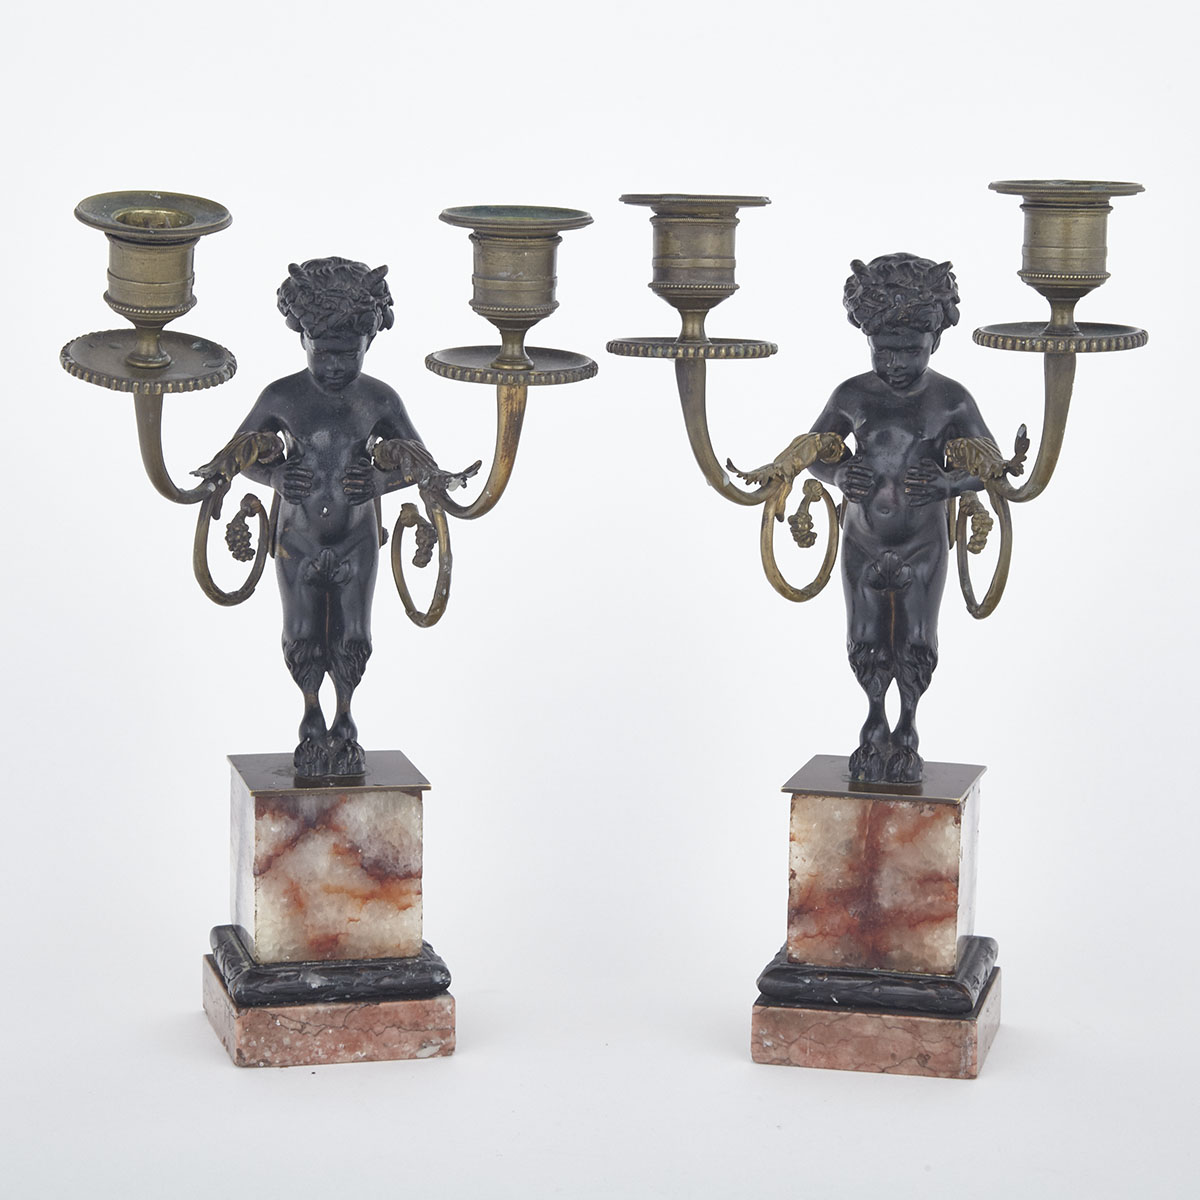 Pair of English Regency DERBYSHIRE SPAR ‘BLUE JOHN’ Mounted Patinated and Gilt Bronze Figural Candelabra, early 19th century